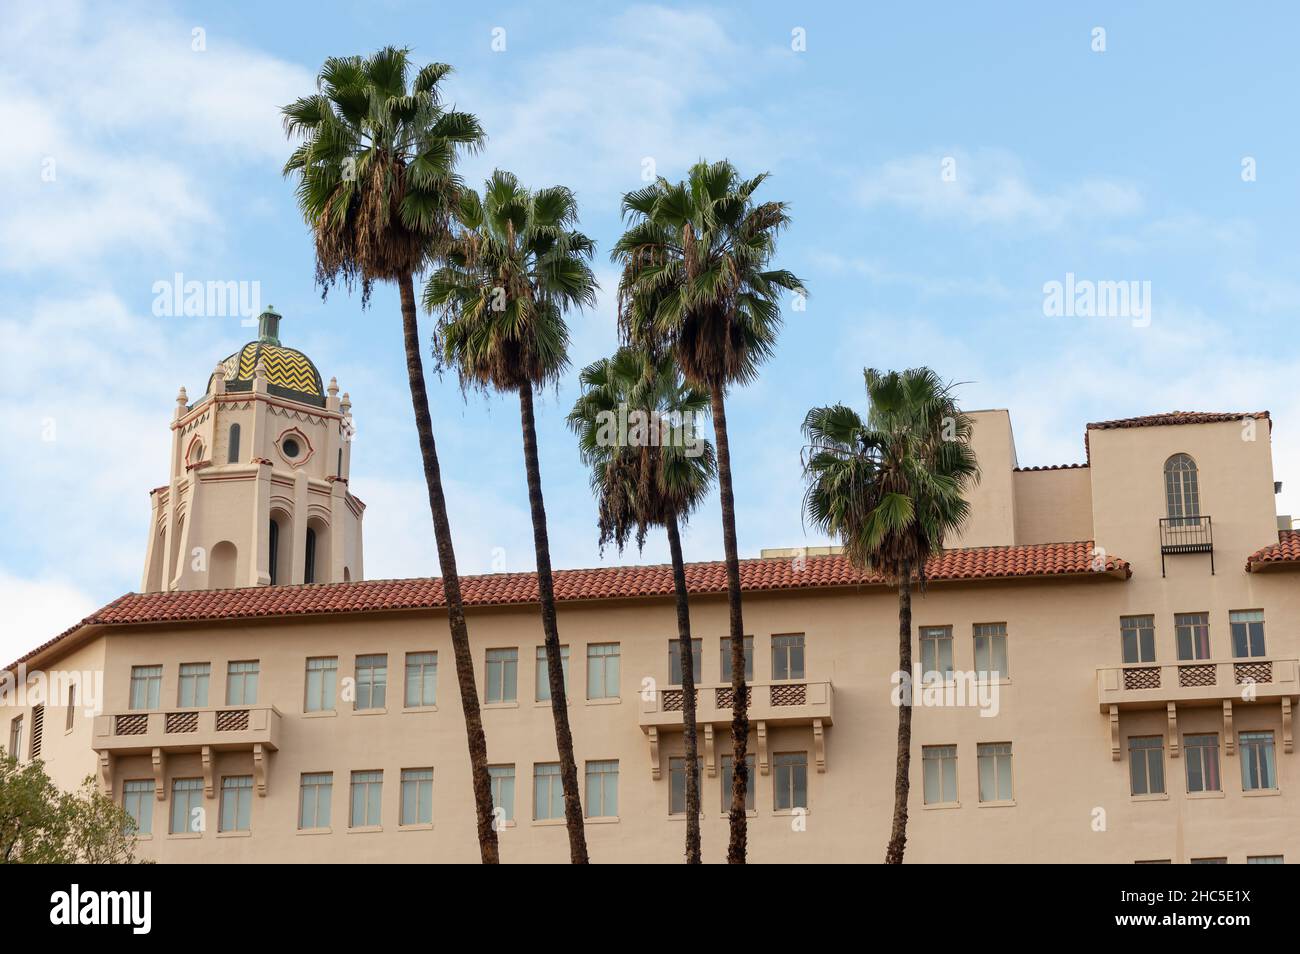 The Richard H. Chambers Courthouse in Pasadena. This is a historic building originally constructed as a resort, Vista del Arroyo Hotel and Bungalows, Stock Photo